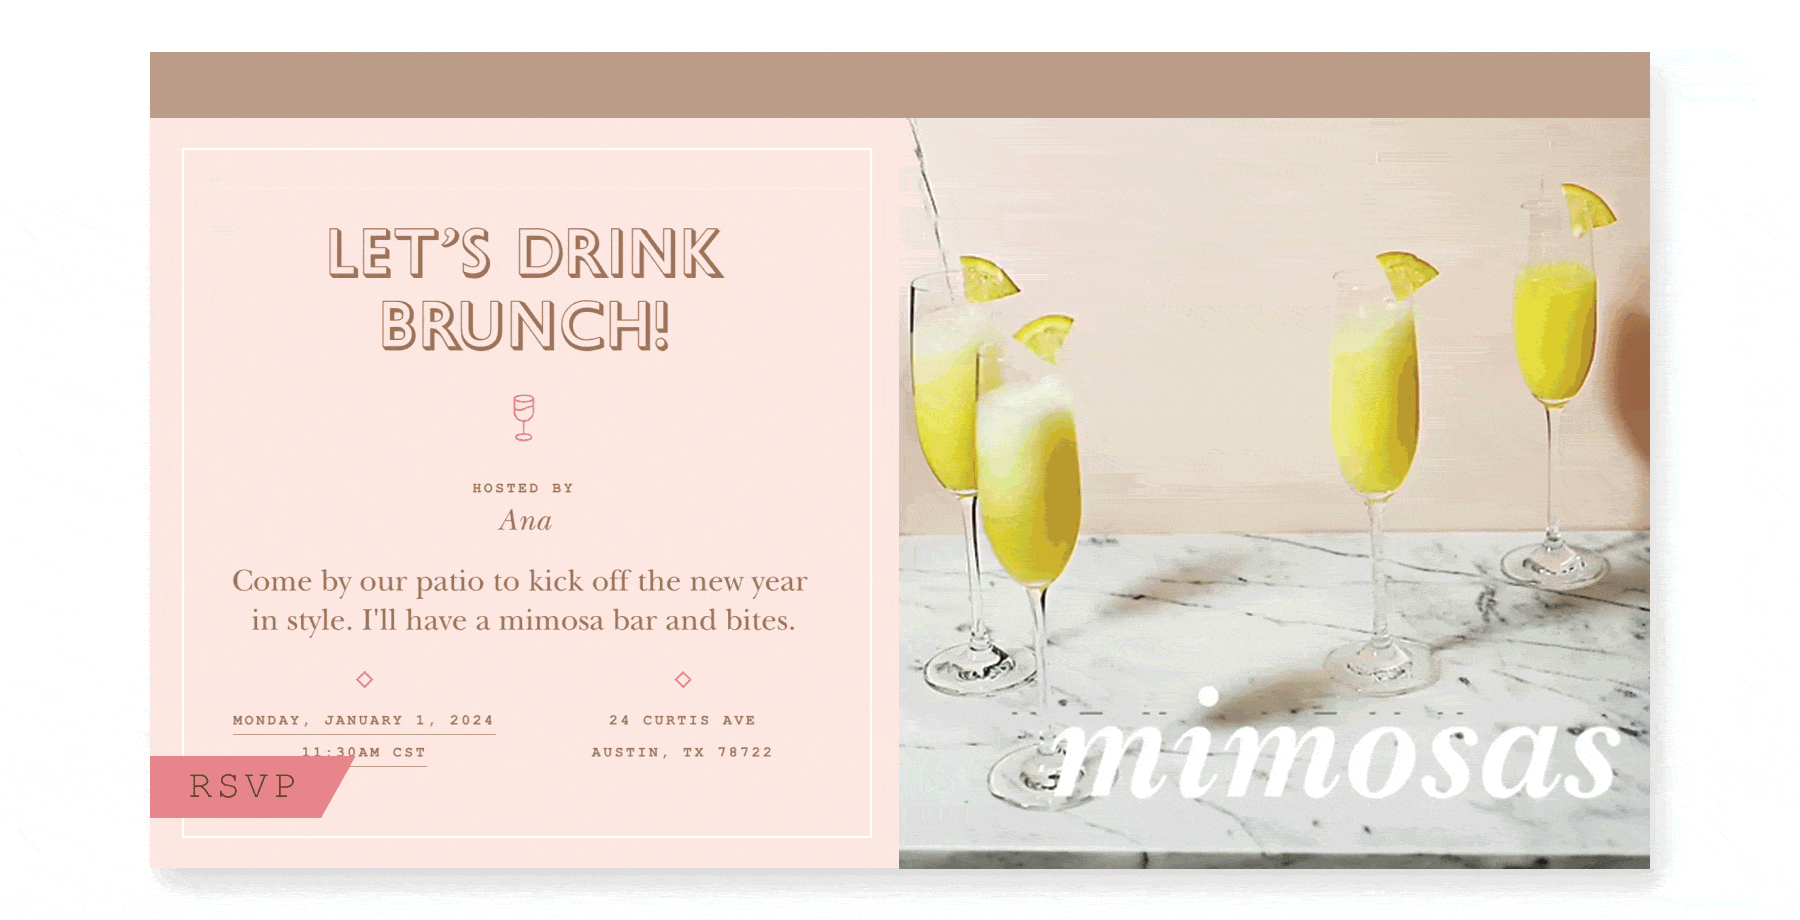 A light pink online invite says “Let’s drink brunch” and on the right are four mimosa drinks with the words “New Year Mimosas.”